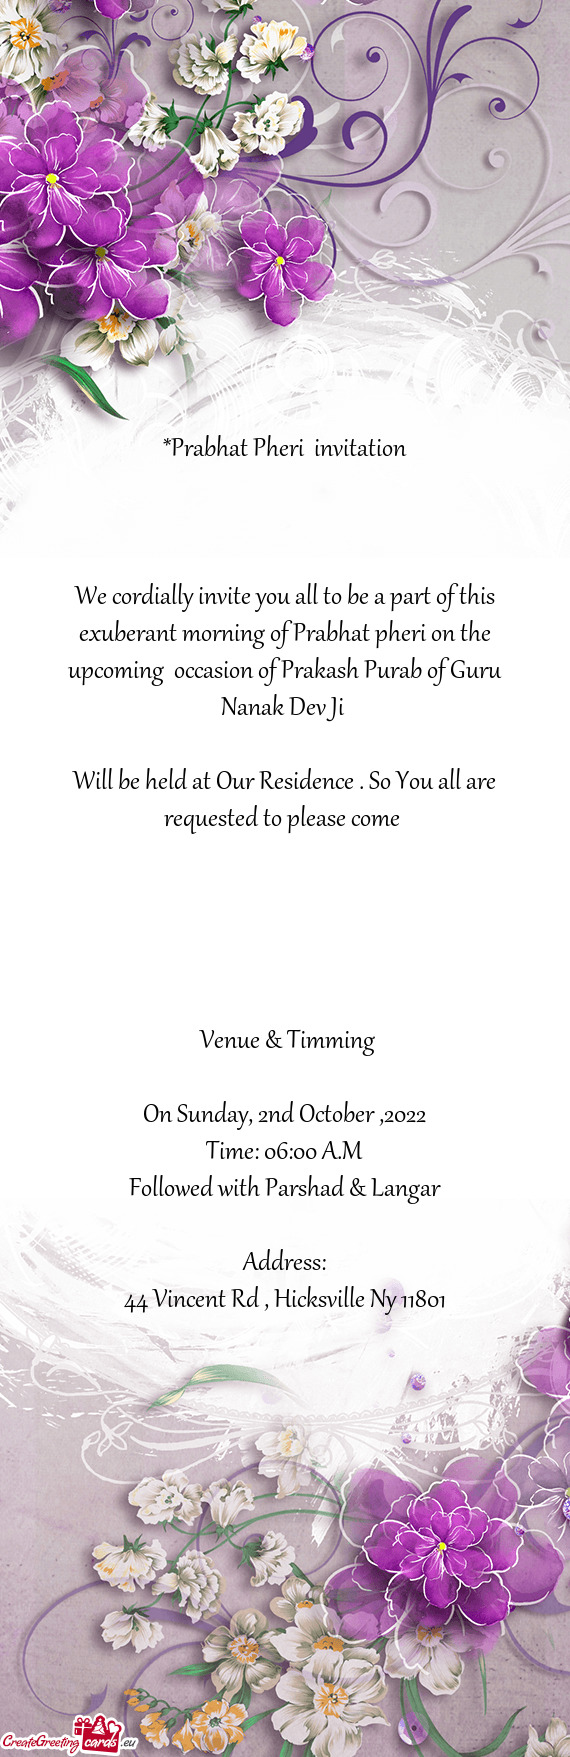 We cordially invite you all to be a part of this exuberant morning of Prabhat pheri on the upcoming